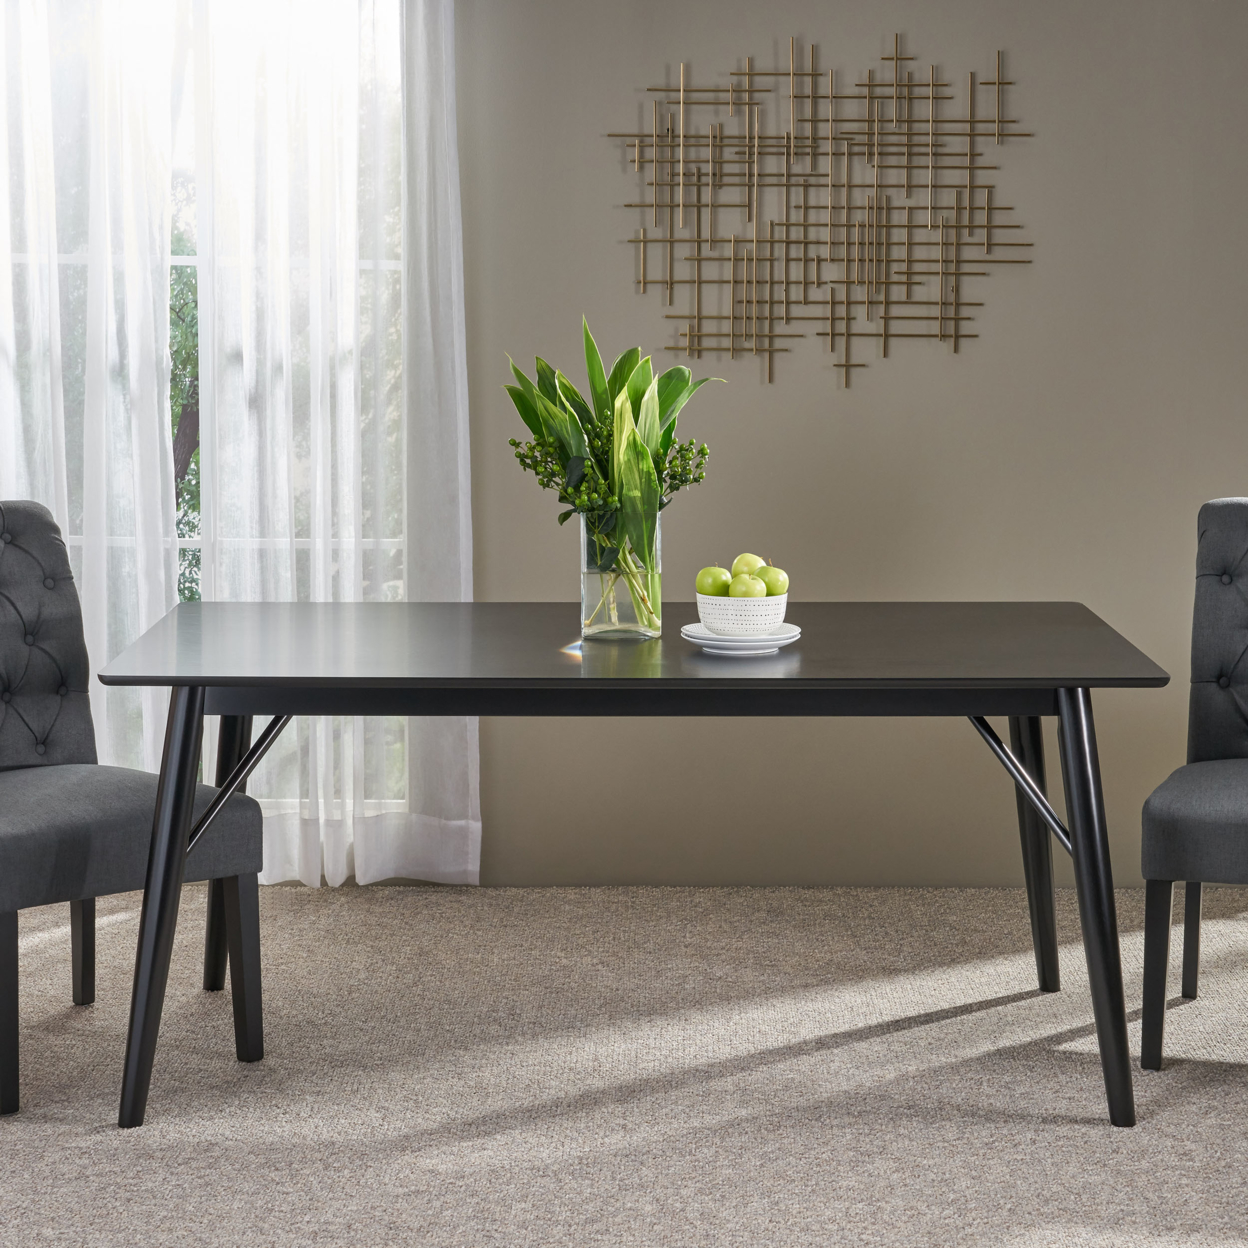 Joey Wooden Six Seater Dining Table - Black Finish